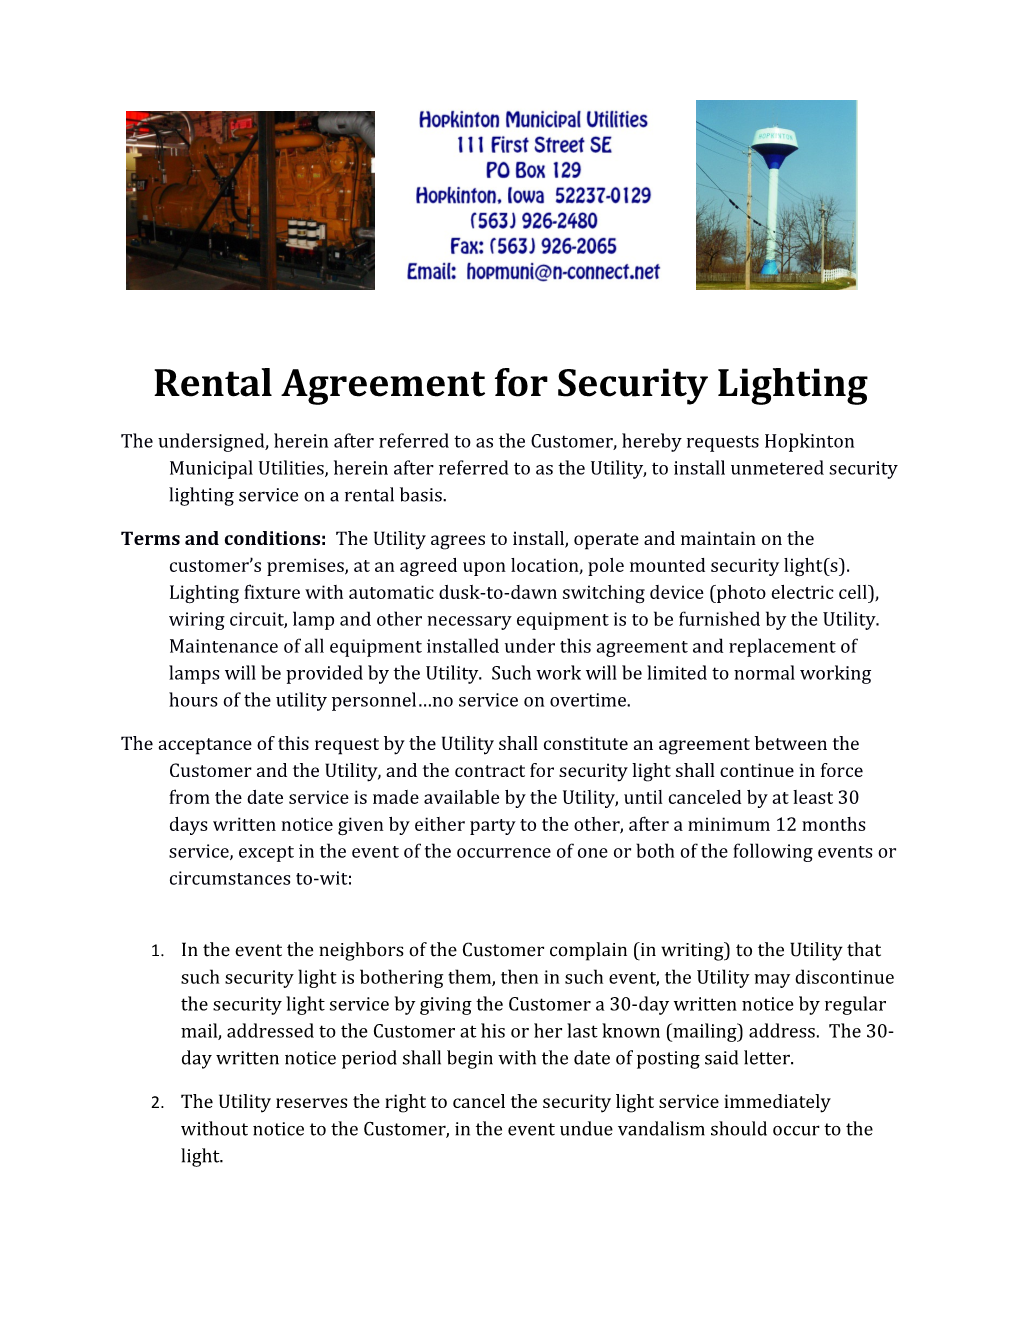 Rental Agreement for Security Lighting